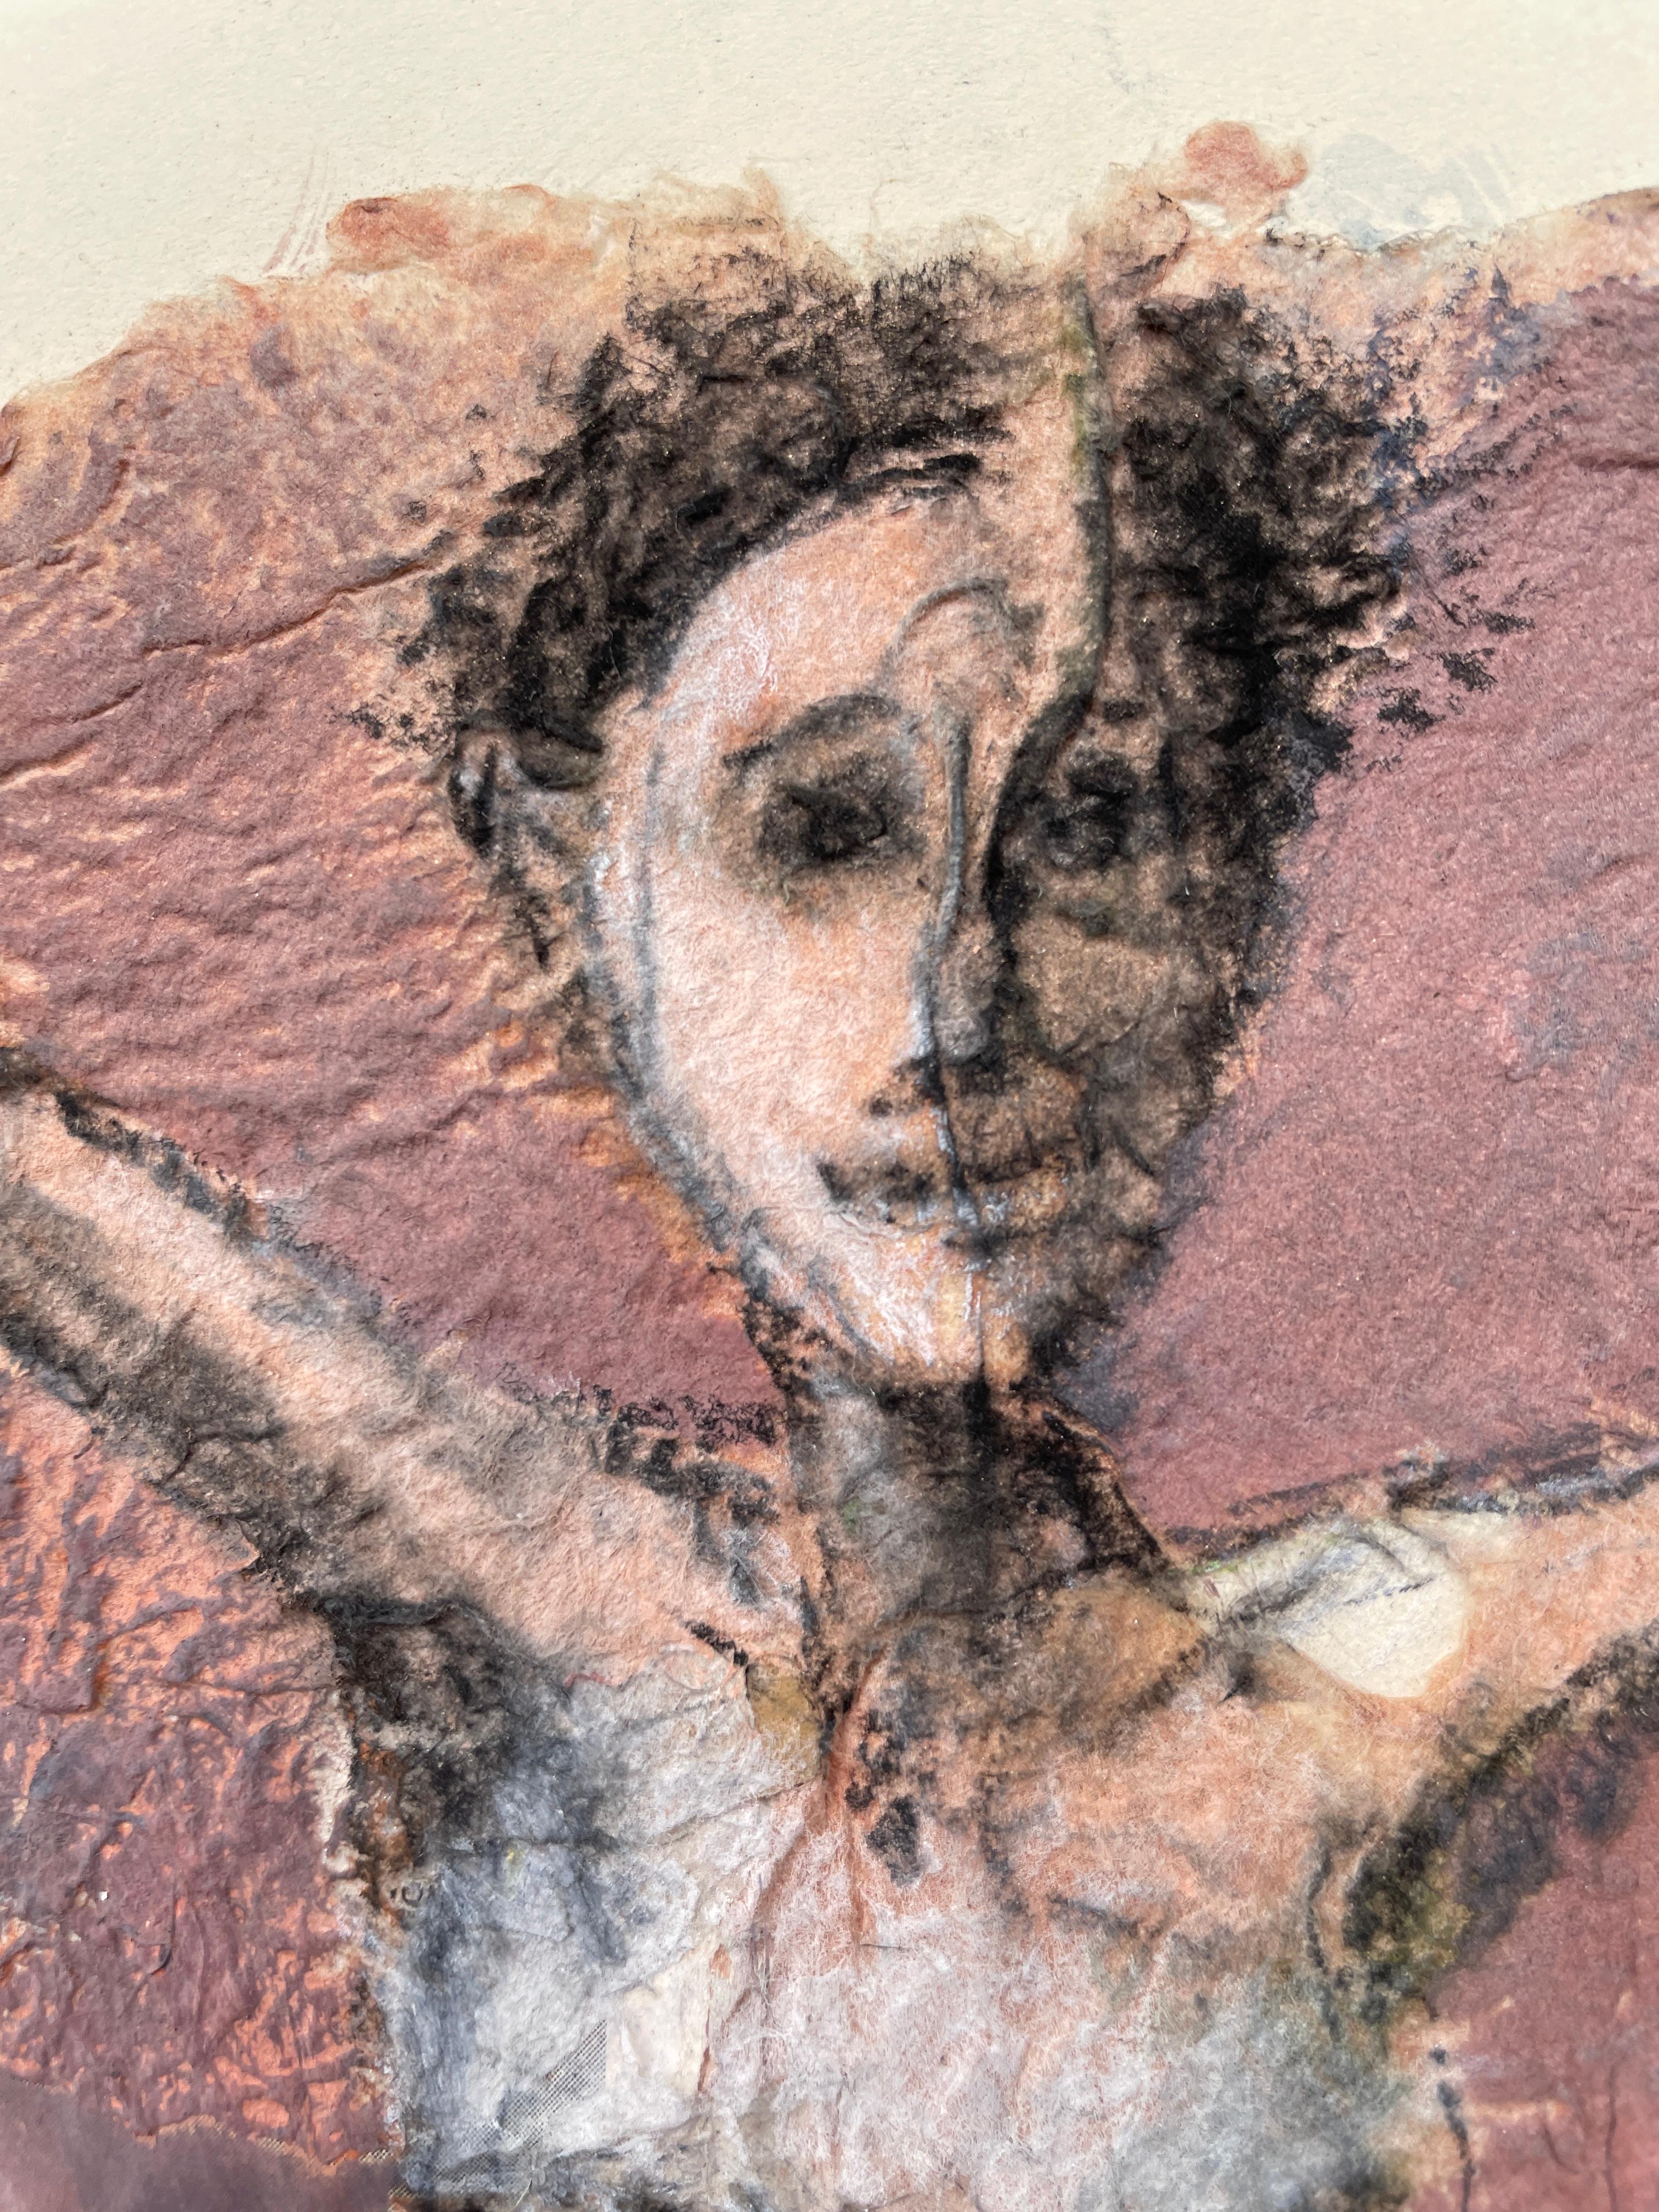 <p>Artist Comments<br>A dancing lady throws her arms in the air with fervor in artist Libby Ramage's mixed-media piece. The work expresses the exuberance of a young girl in a flowing white dress. The uneven edges of the handmade paper and the laced